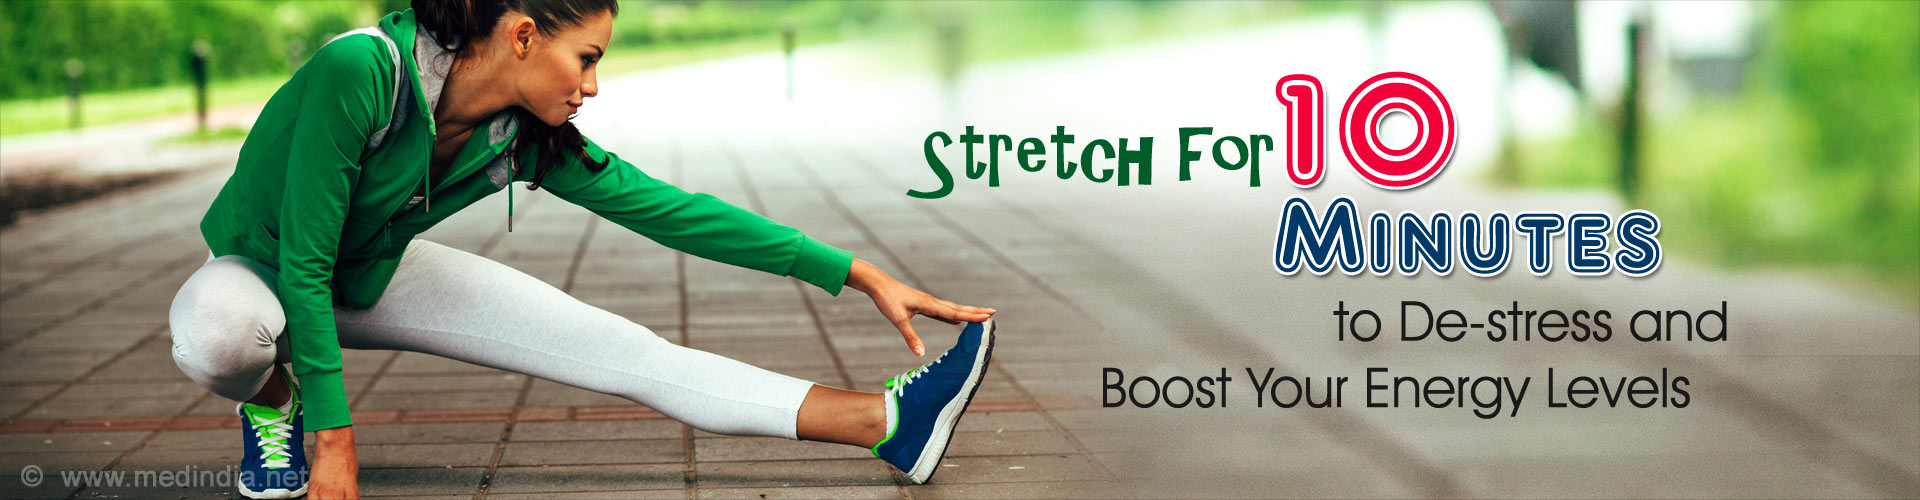 Stretch for 10 Minutes to De-stress and Boost Your Energy Levels